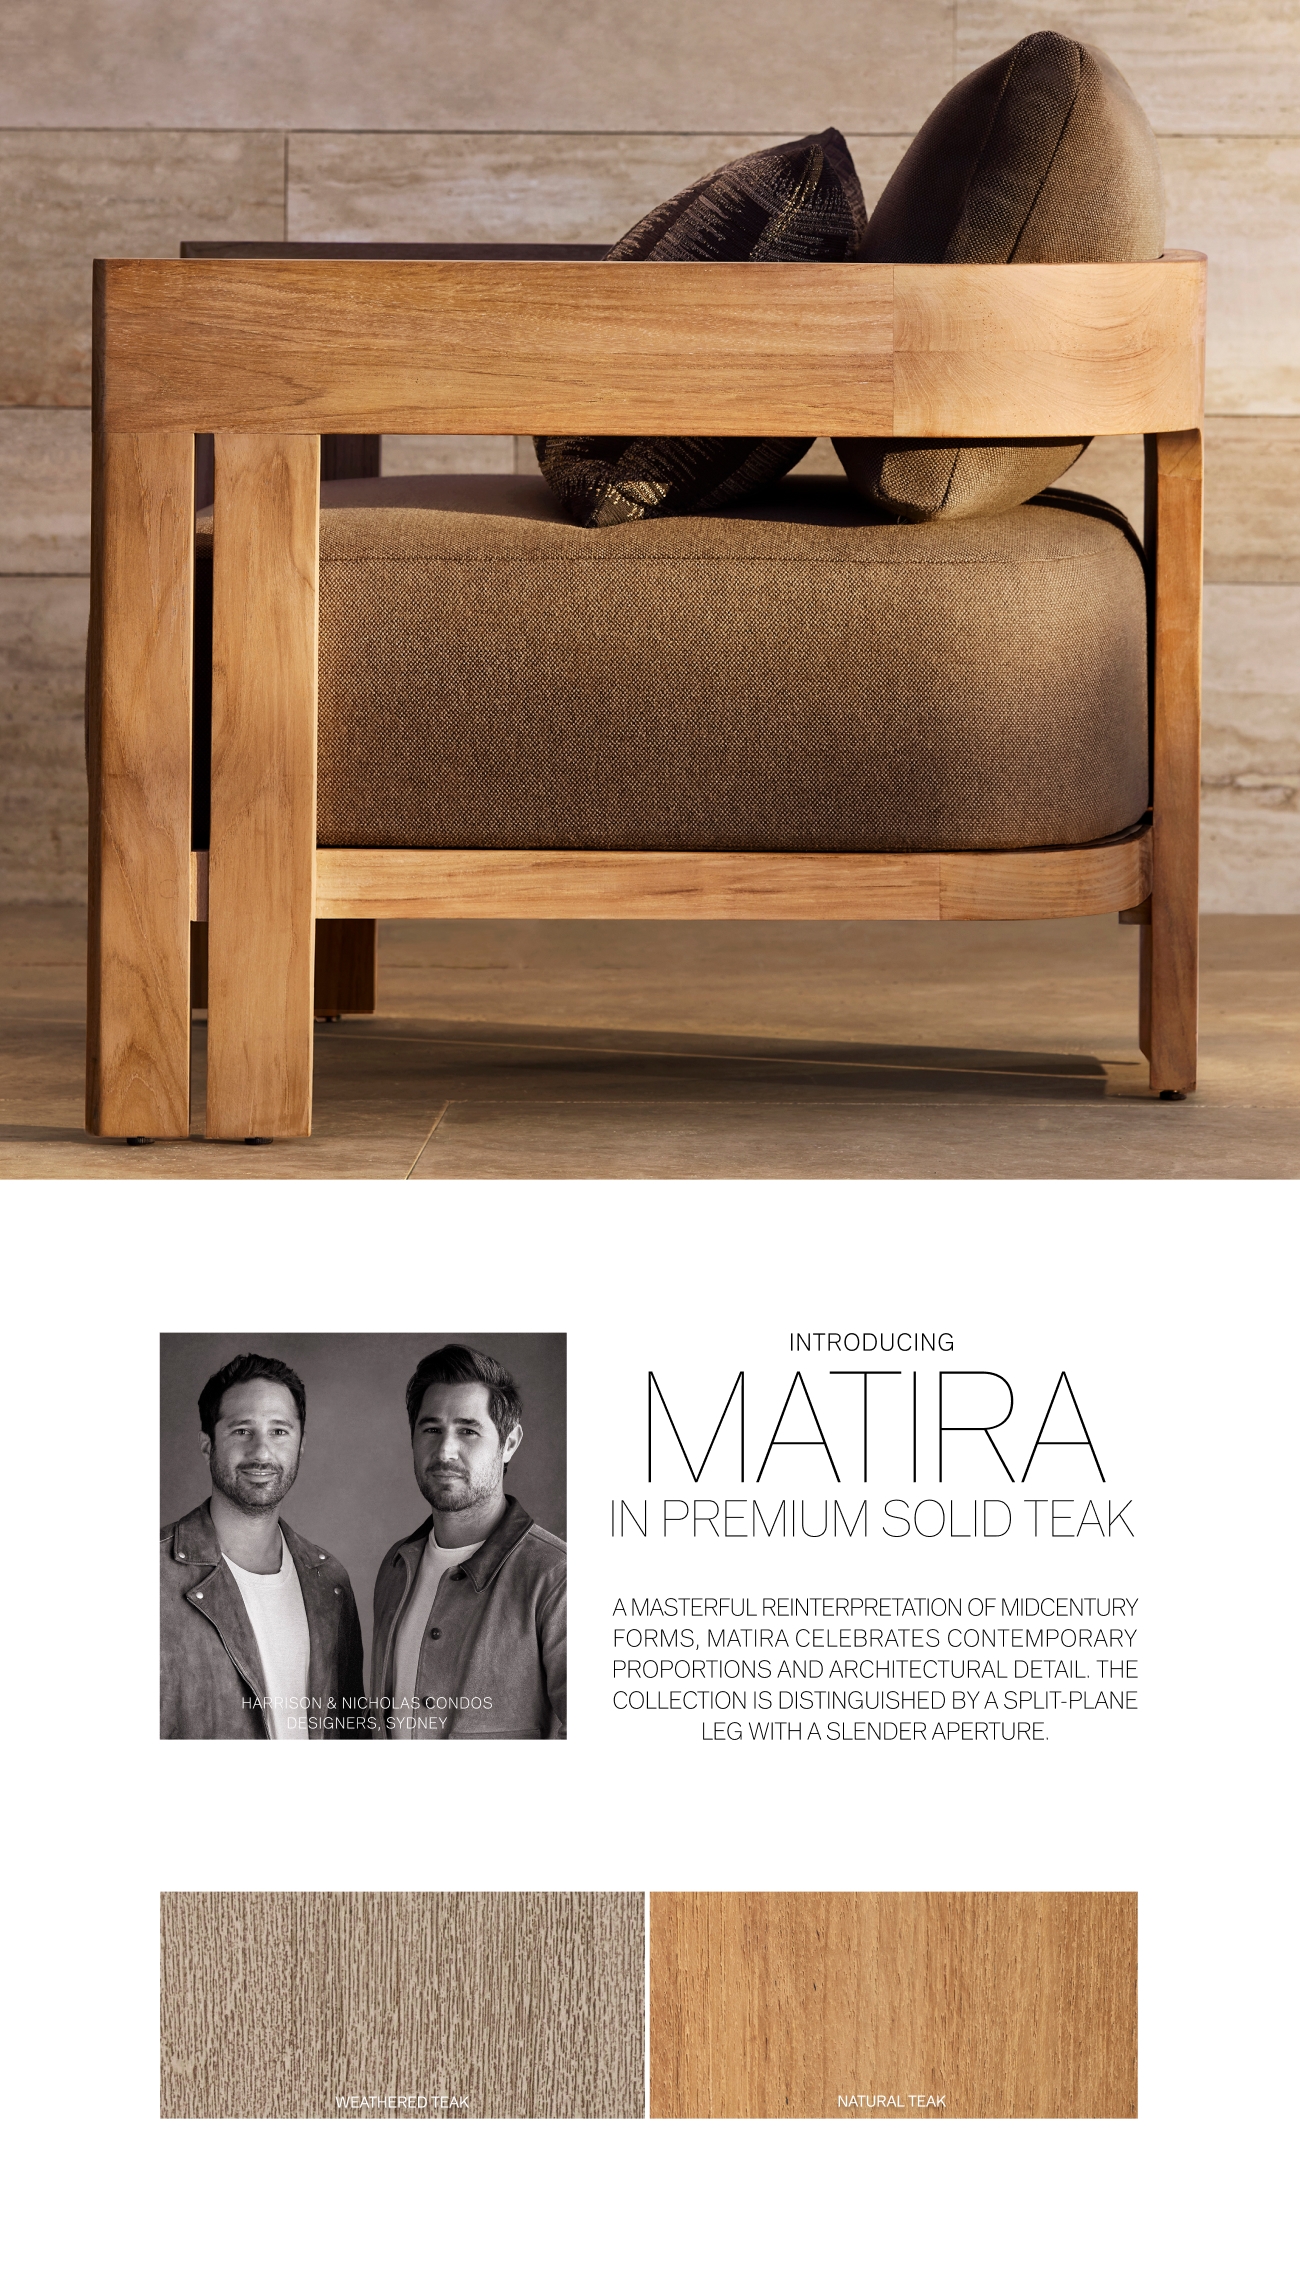 LAS CONDOS k INTRODUCING MATTRA IN PREMIUM SOLID TEAK AMASTERFUL REINTERPRETATION OF MIDCENTURY FORMS, MATIRA CELEBRATES CONTEMPORARY PROPORTIONS AND ARCHITECTURAL DETAIL. THE COLLECTION IS DISTINGUISHED BY A SPLIT-PLANE LEG WITH A SLENDER APERTURE DAV 720 